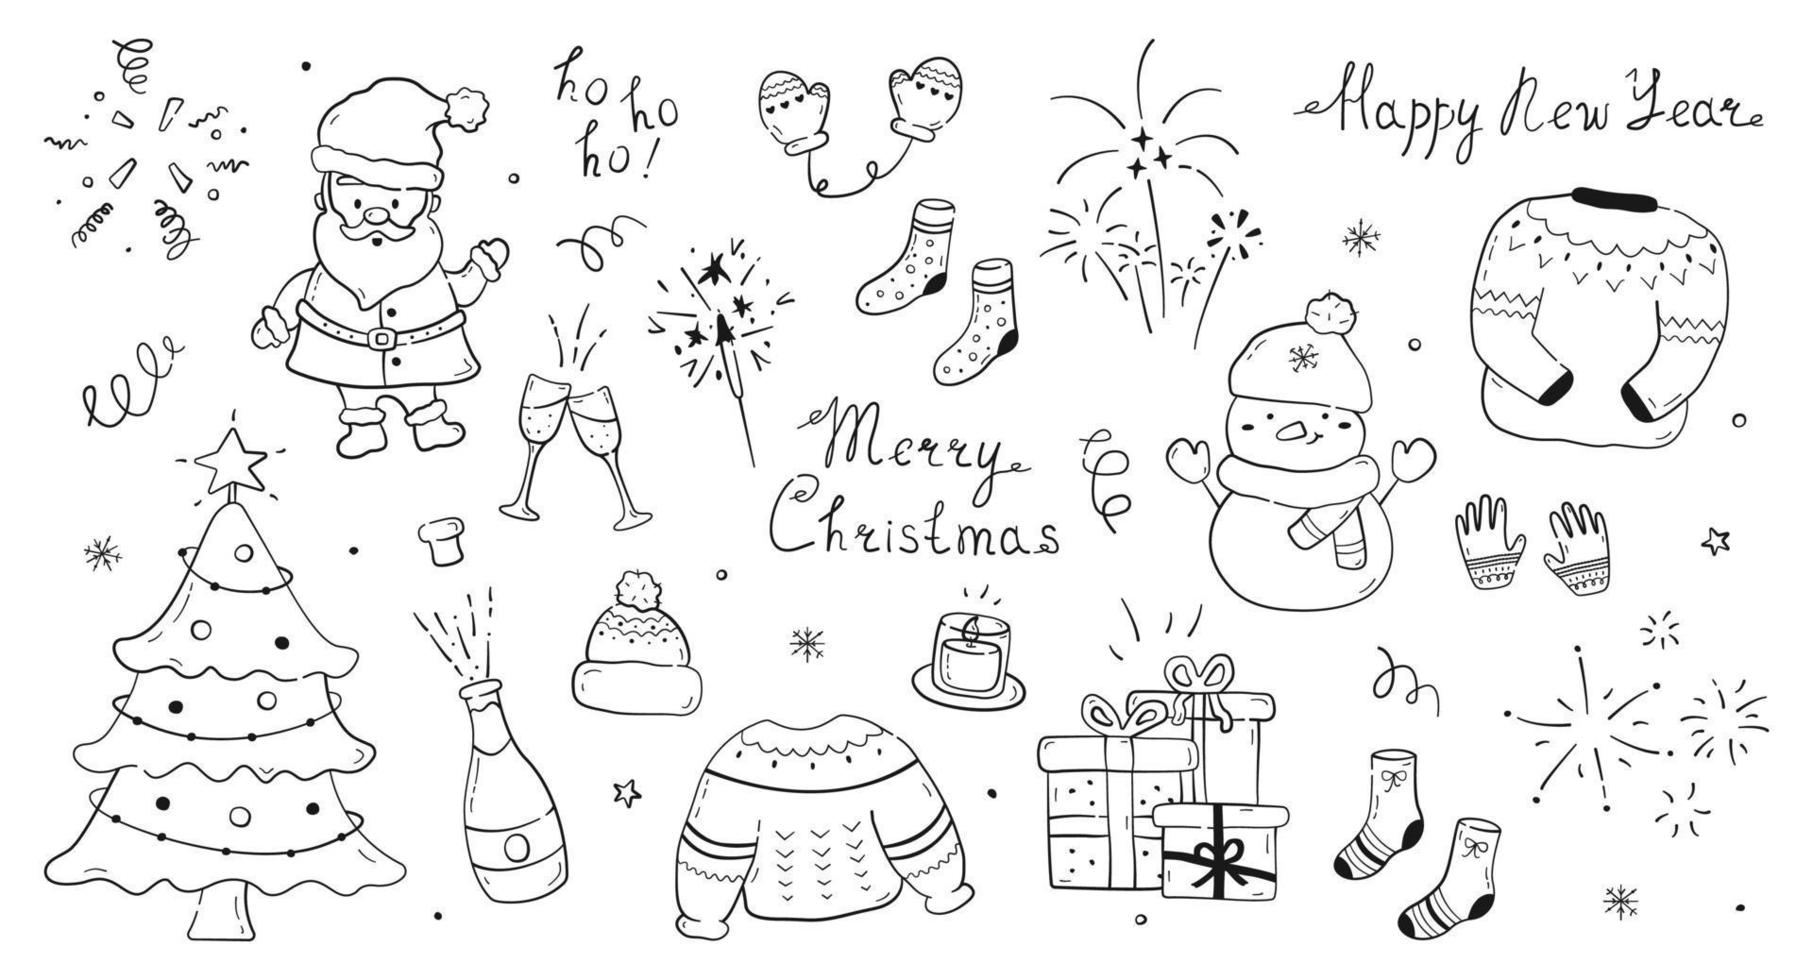 Big collection of hand drawn New Year elements and lettering. Cute doodles set of Christmas characters and tree, champagne, sparkler, firework, confetti, candle, gift boxes and winter clothes. vector